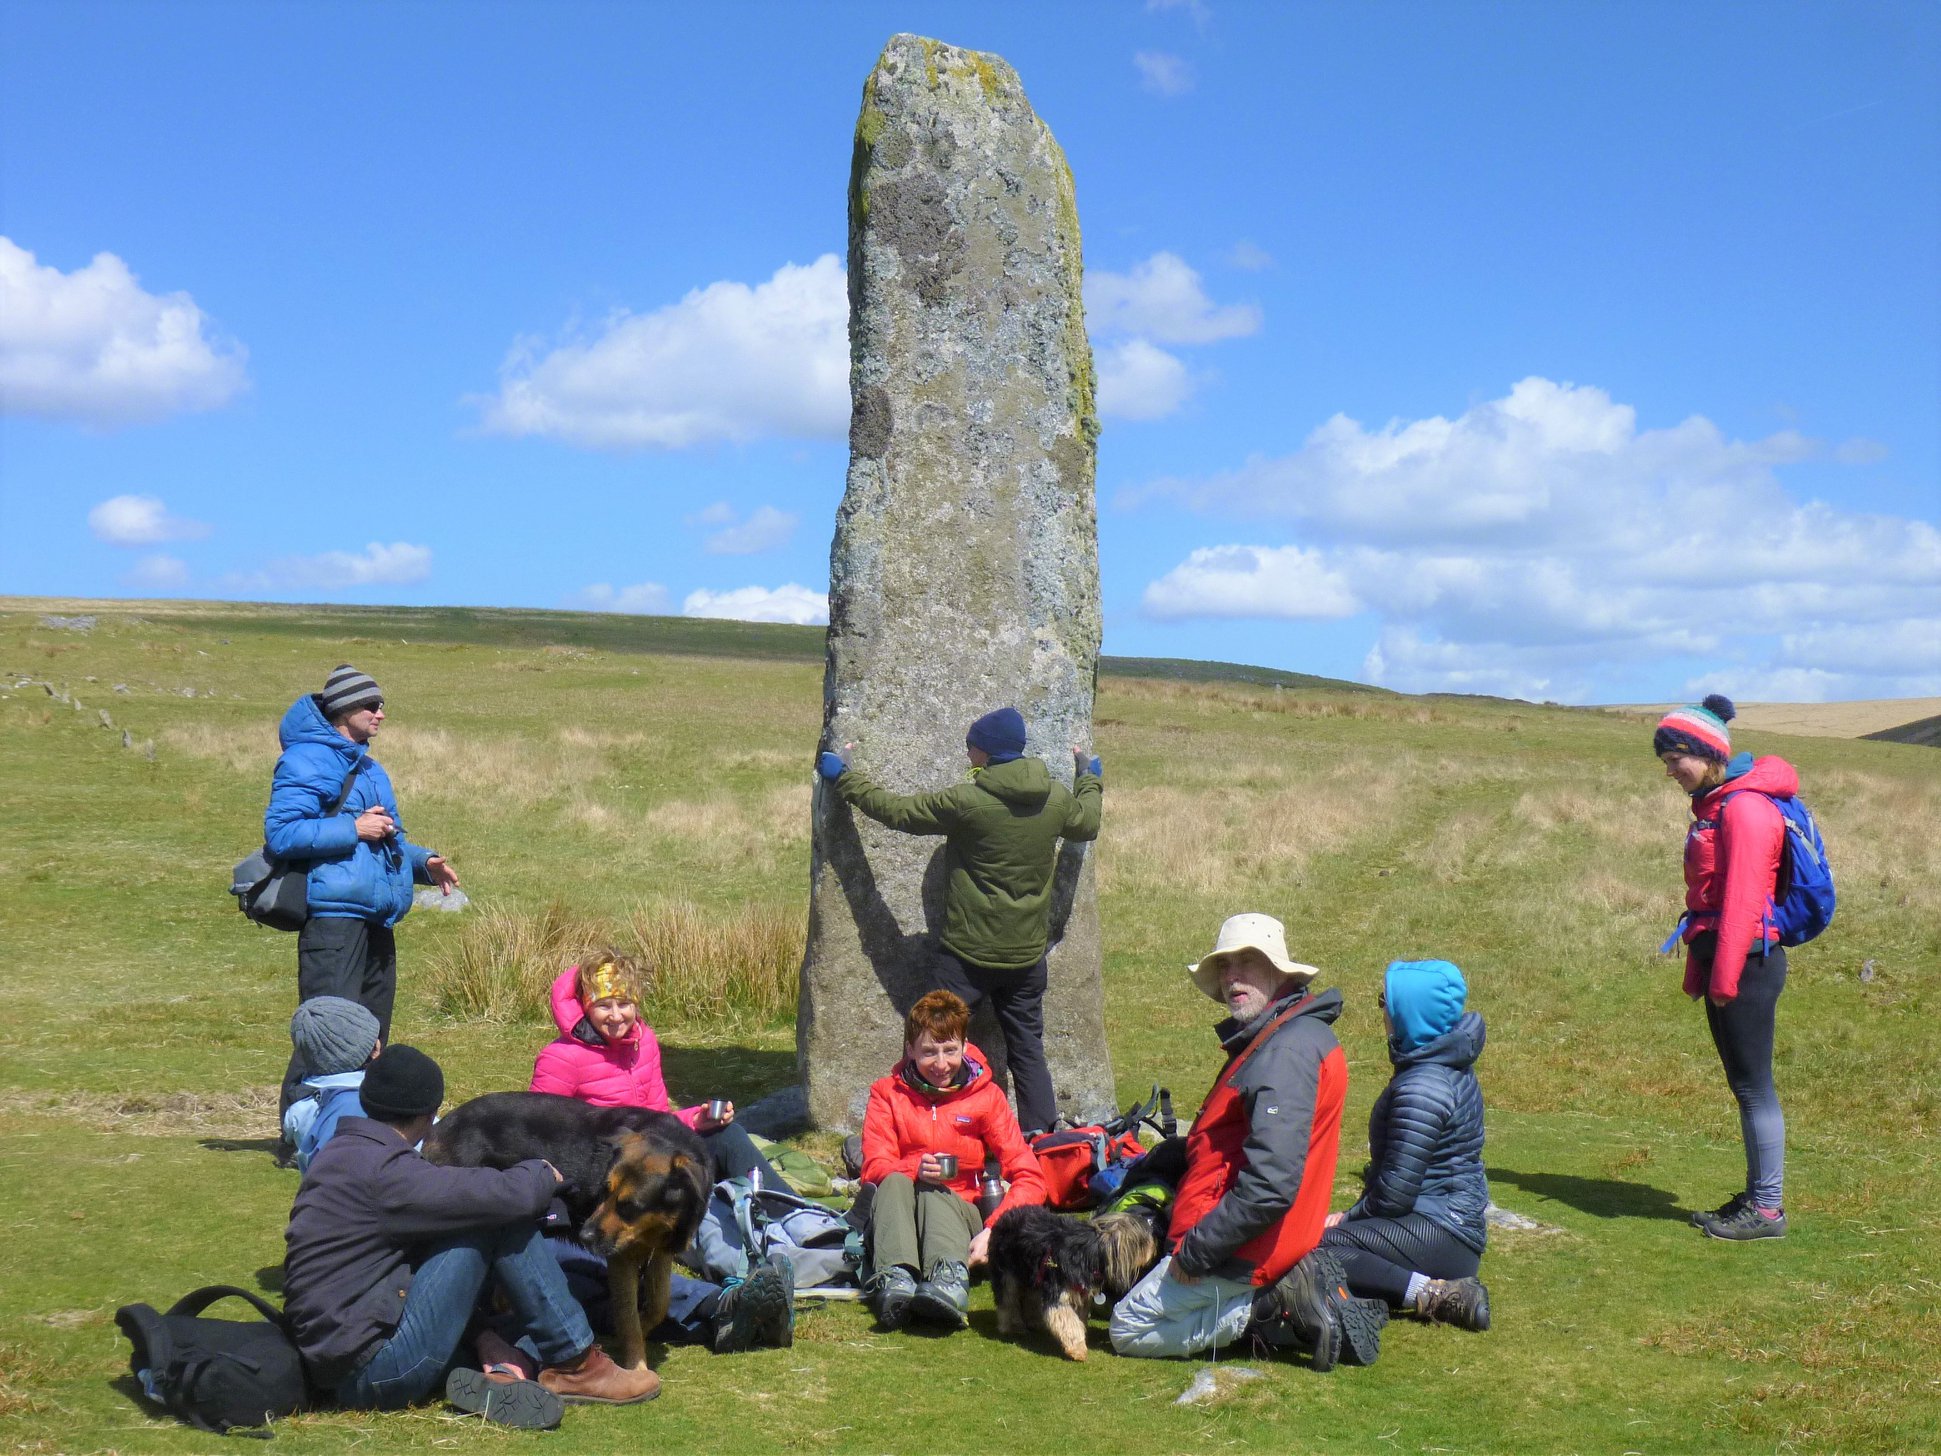 A club member attempting to re-arrange the scenery on a club trip to Dartmoor.